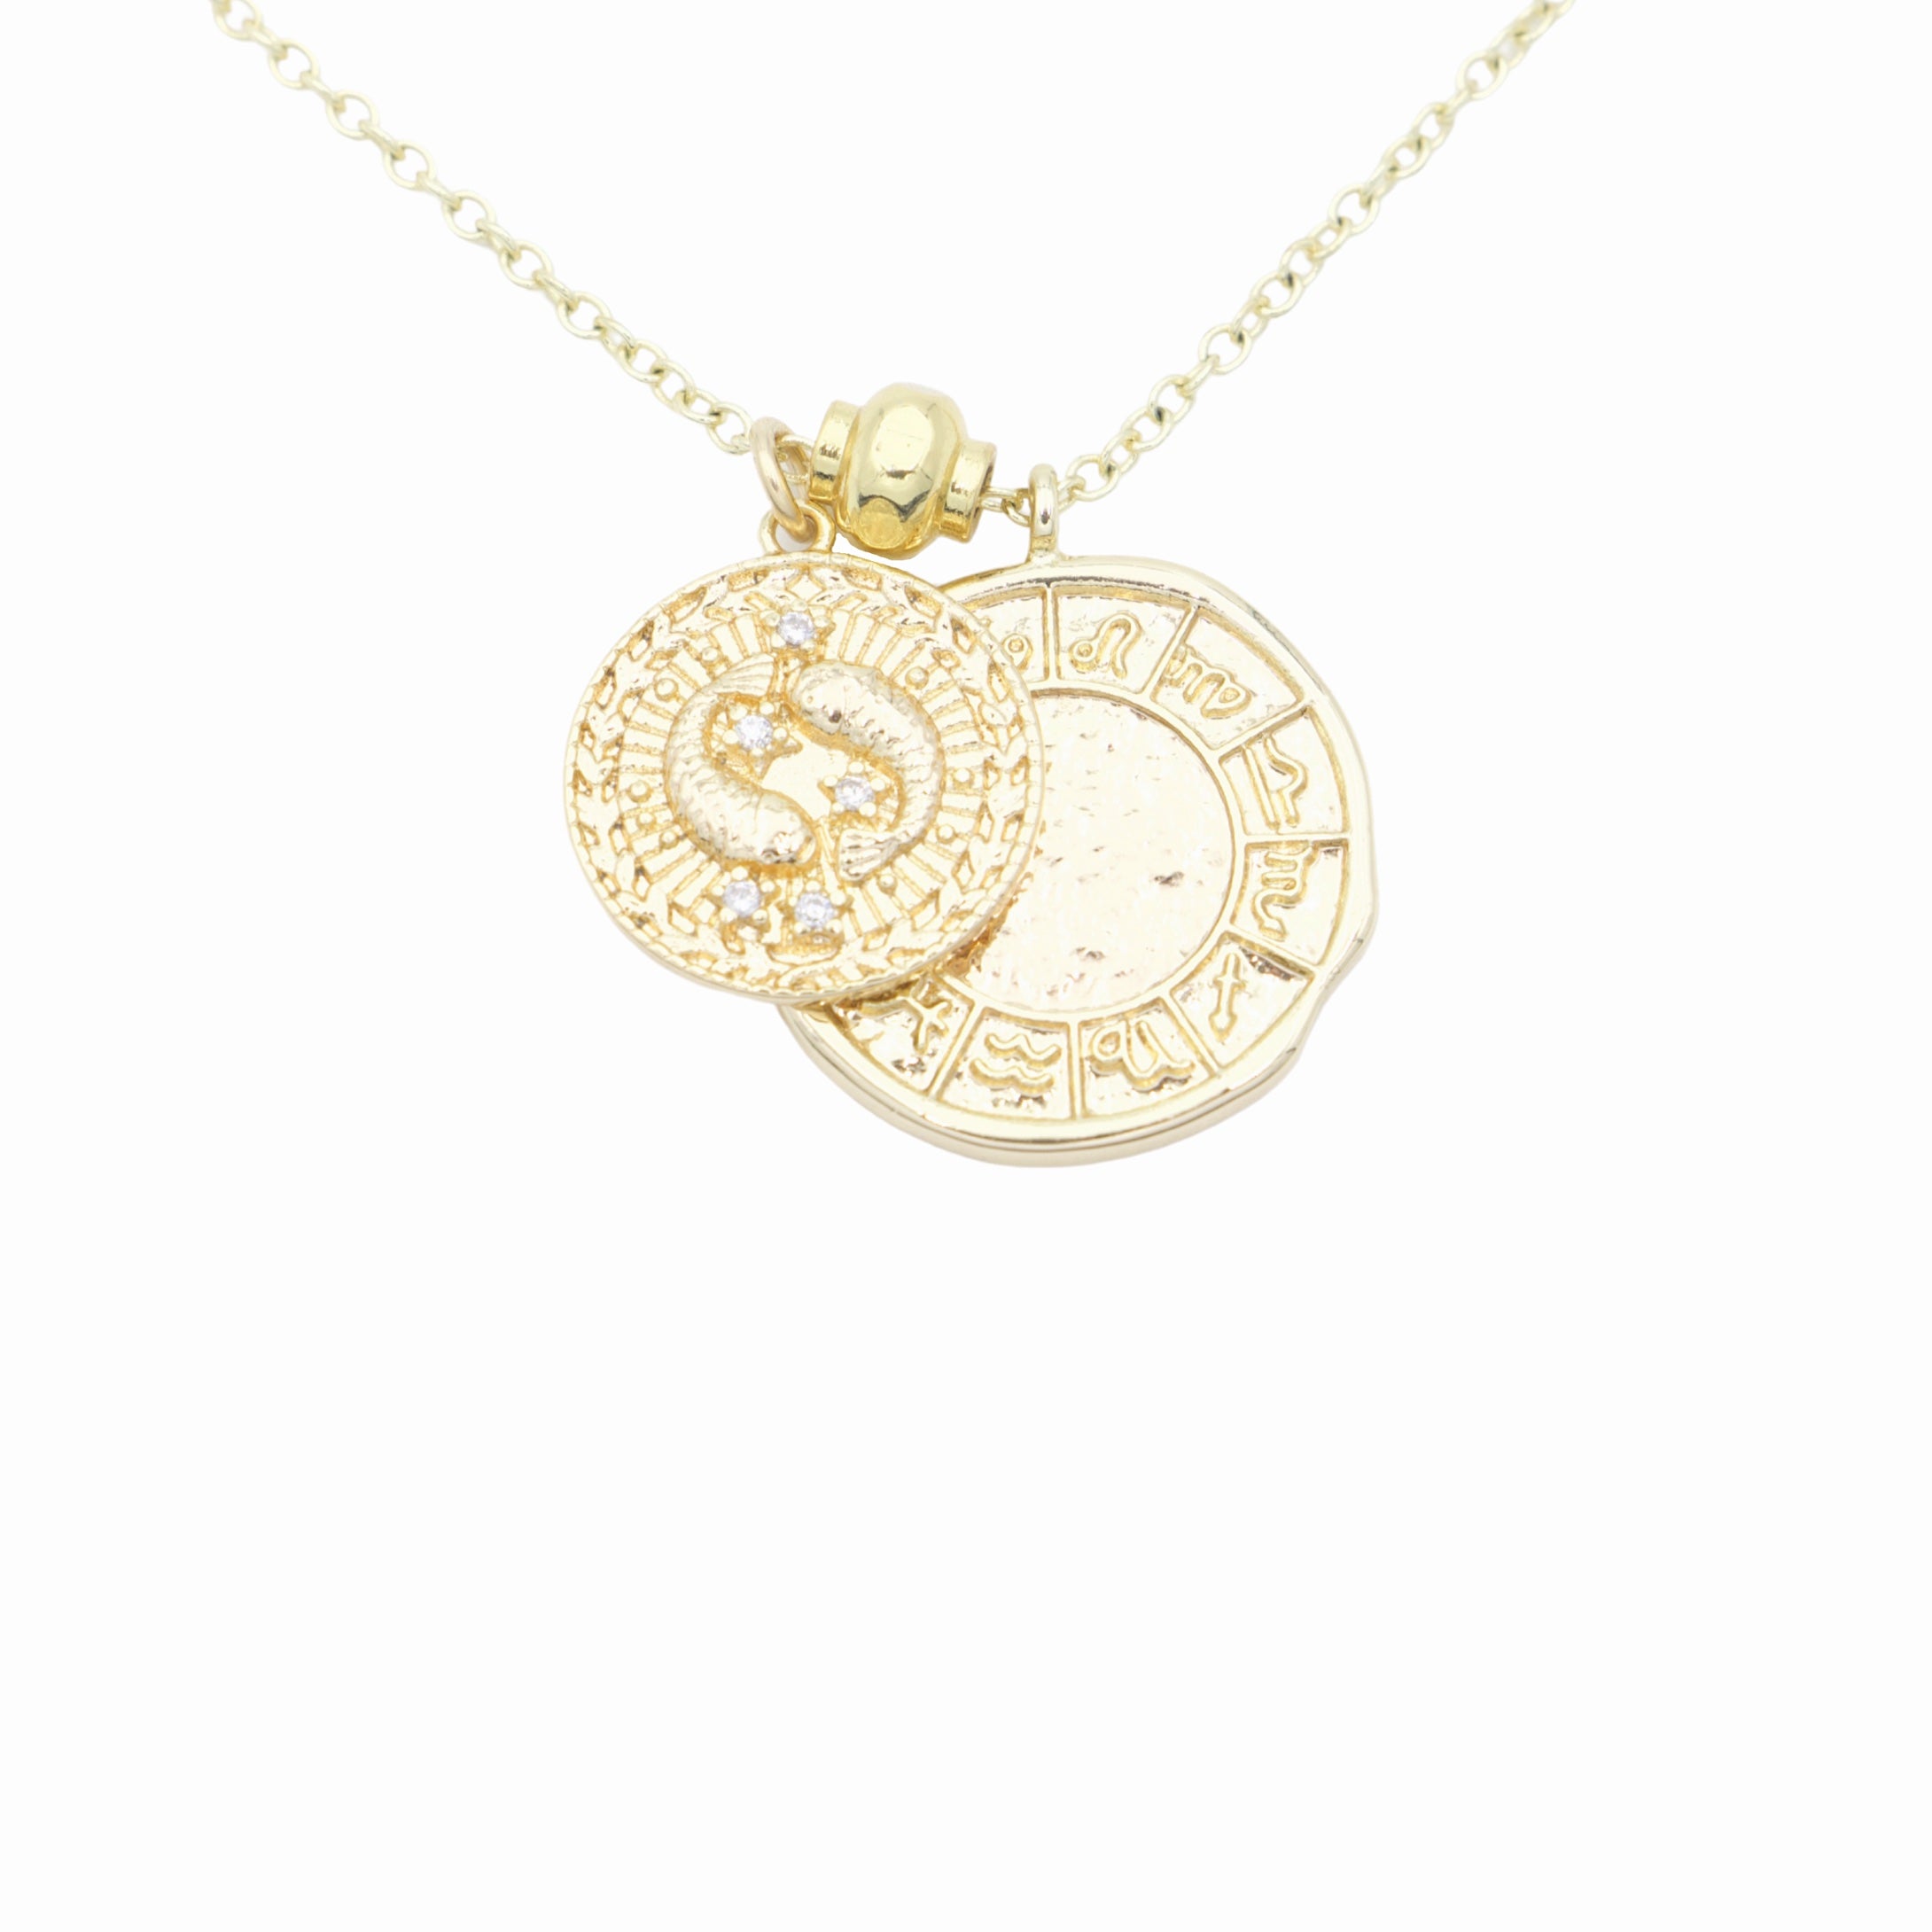 AW Boutique's dual zodiac coin necklace featuring a dainty necklace chain, zodiac rustic coin charm, and your chosen star sign coin charm. Charms separated by a gold bead. Part of the Celestial Collection. Gold filled jewellery. Option shown is Pisces.